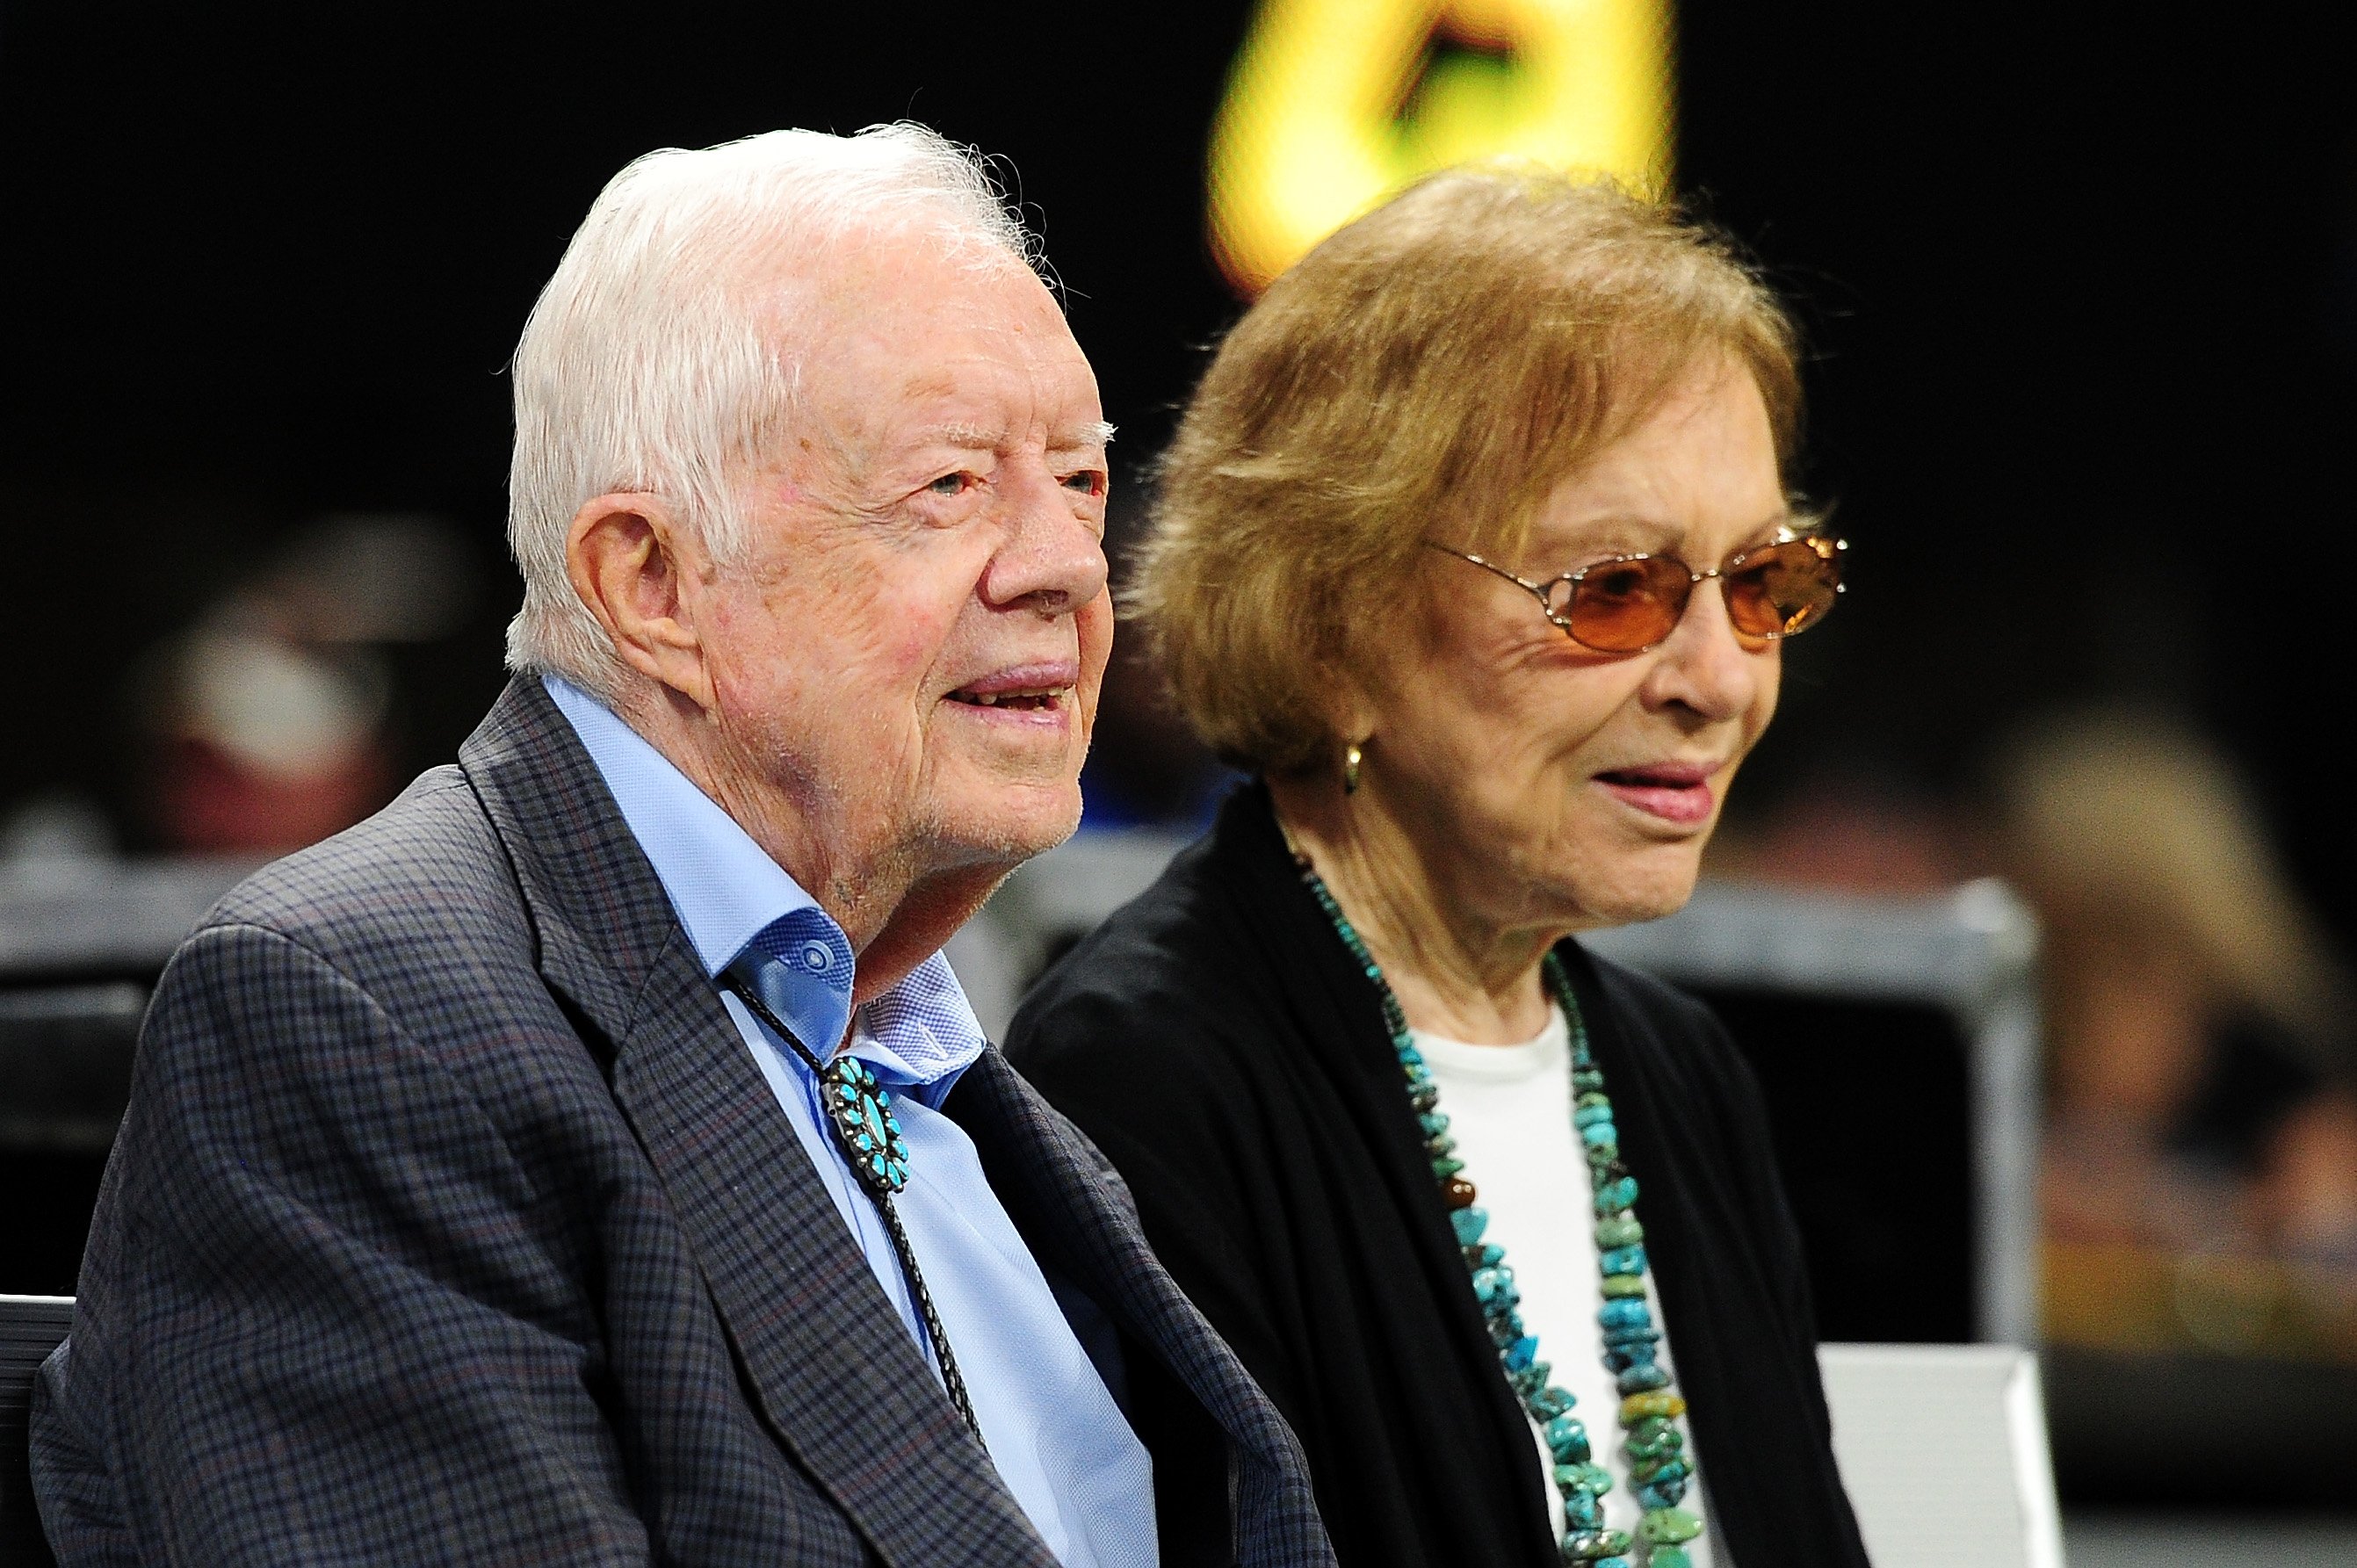 Former president Jimmy Carter and his wife Rosalynn prior to the game between the Atlanta Falcons and the Cincinnati Bengals at Mercedes-Benz Stadium on September 30, 2018 in Atlanta, Georgia. | Getty Images